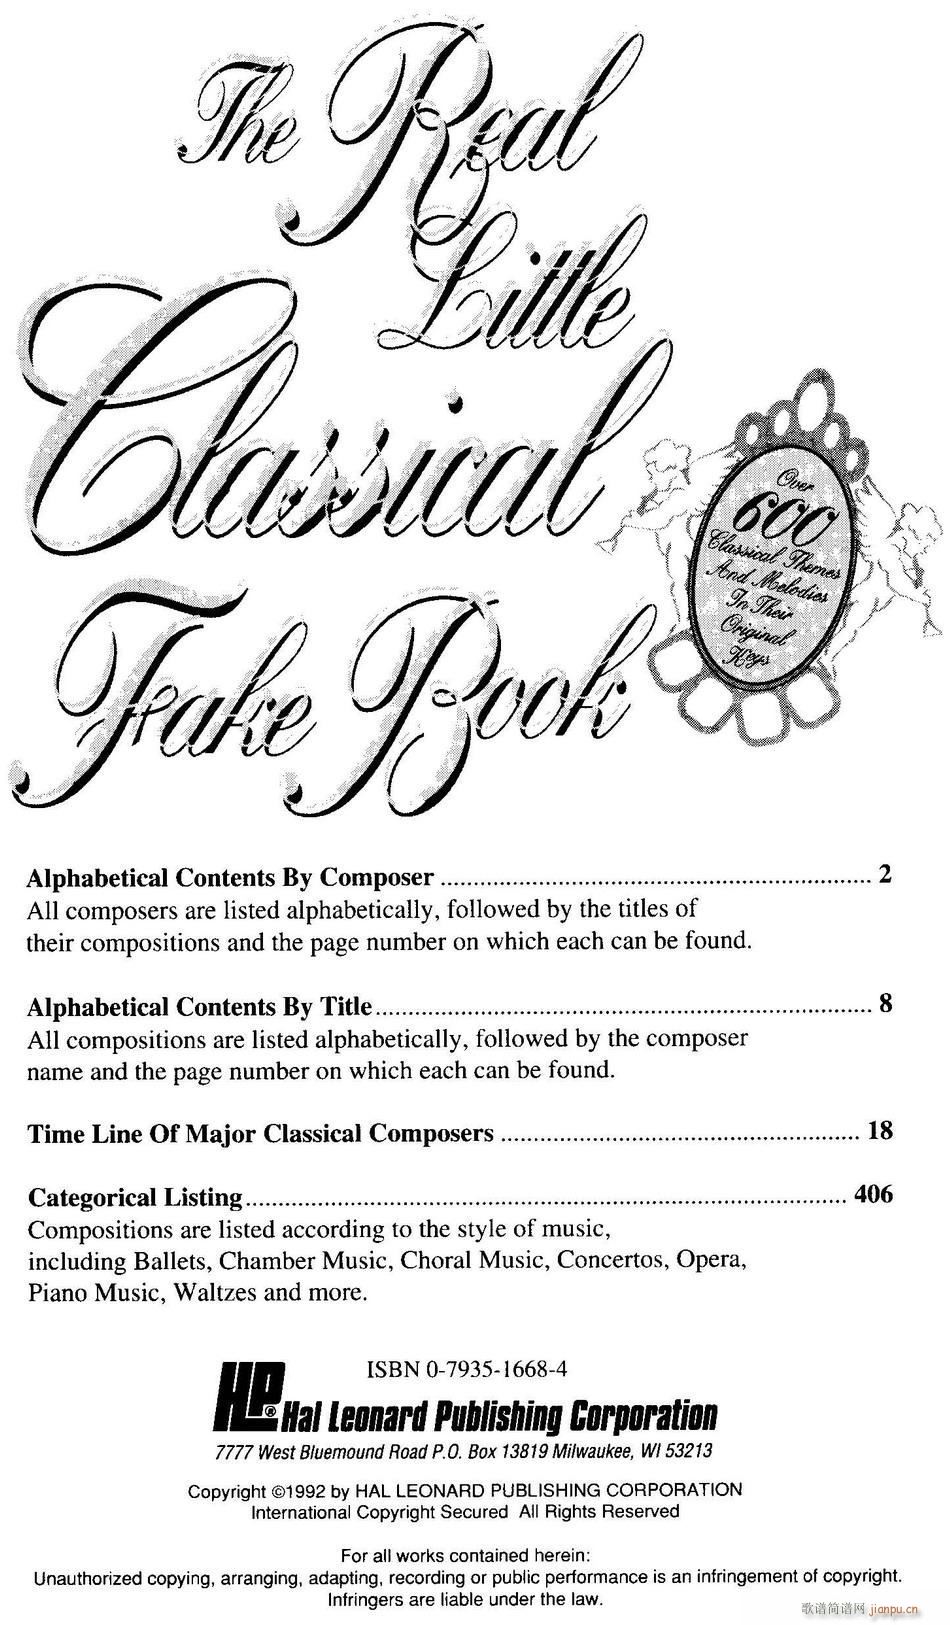 The Real Little Classical Fake Book P1 20(ʮּ)1